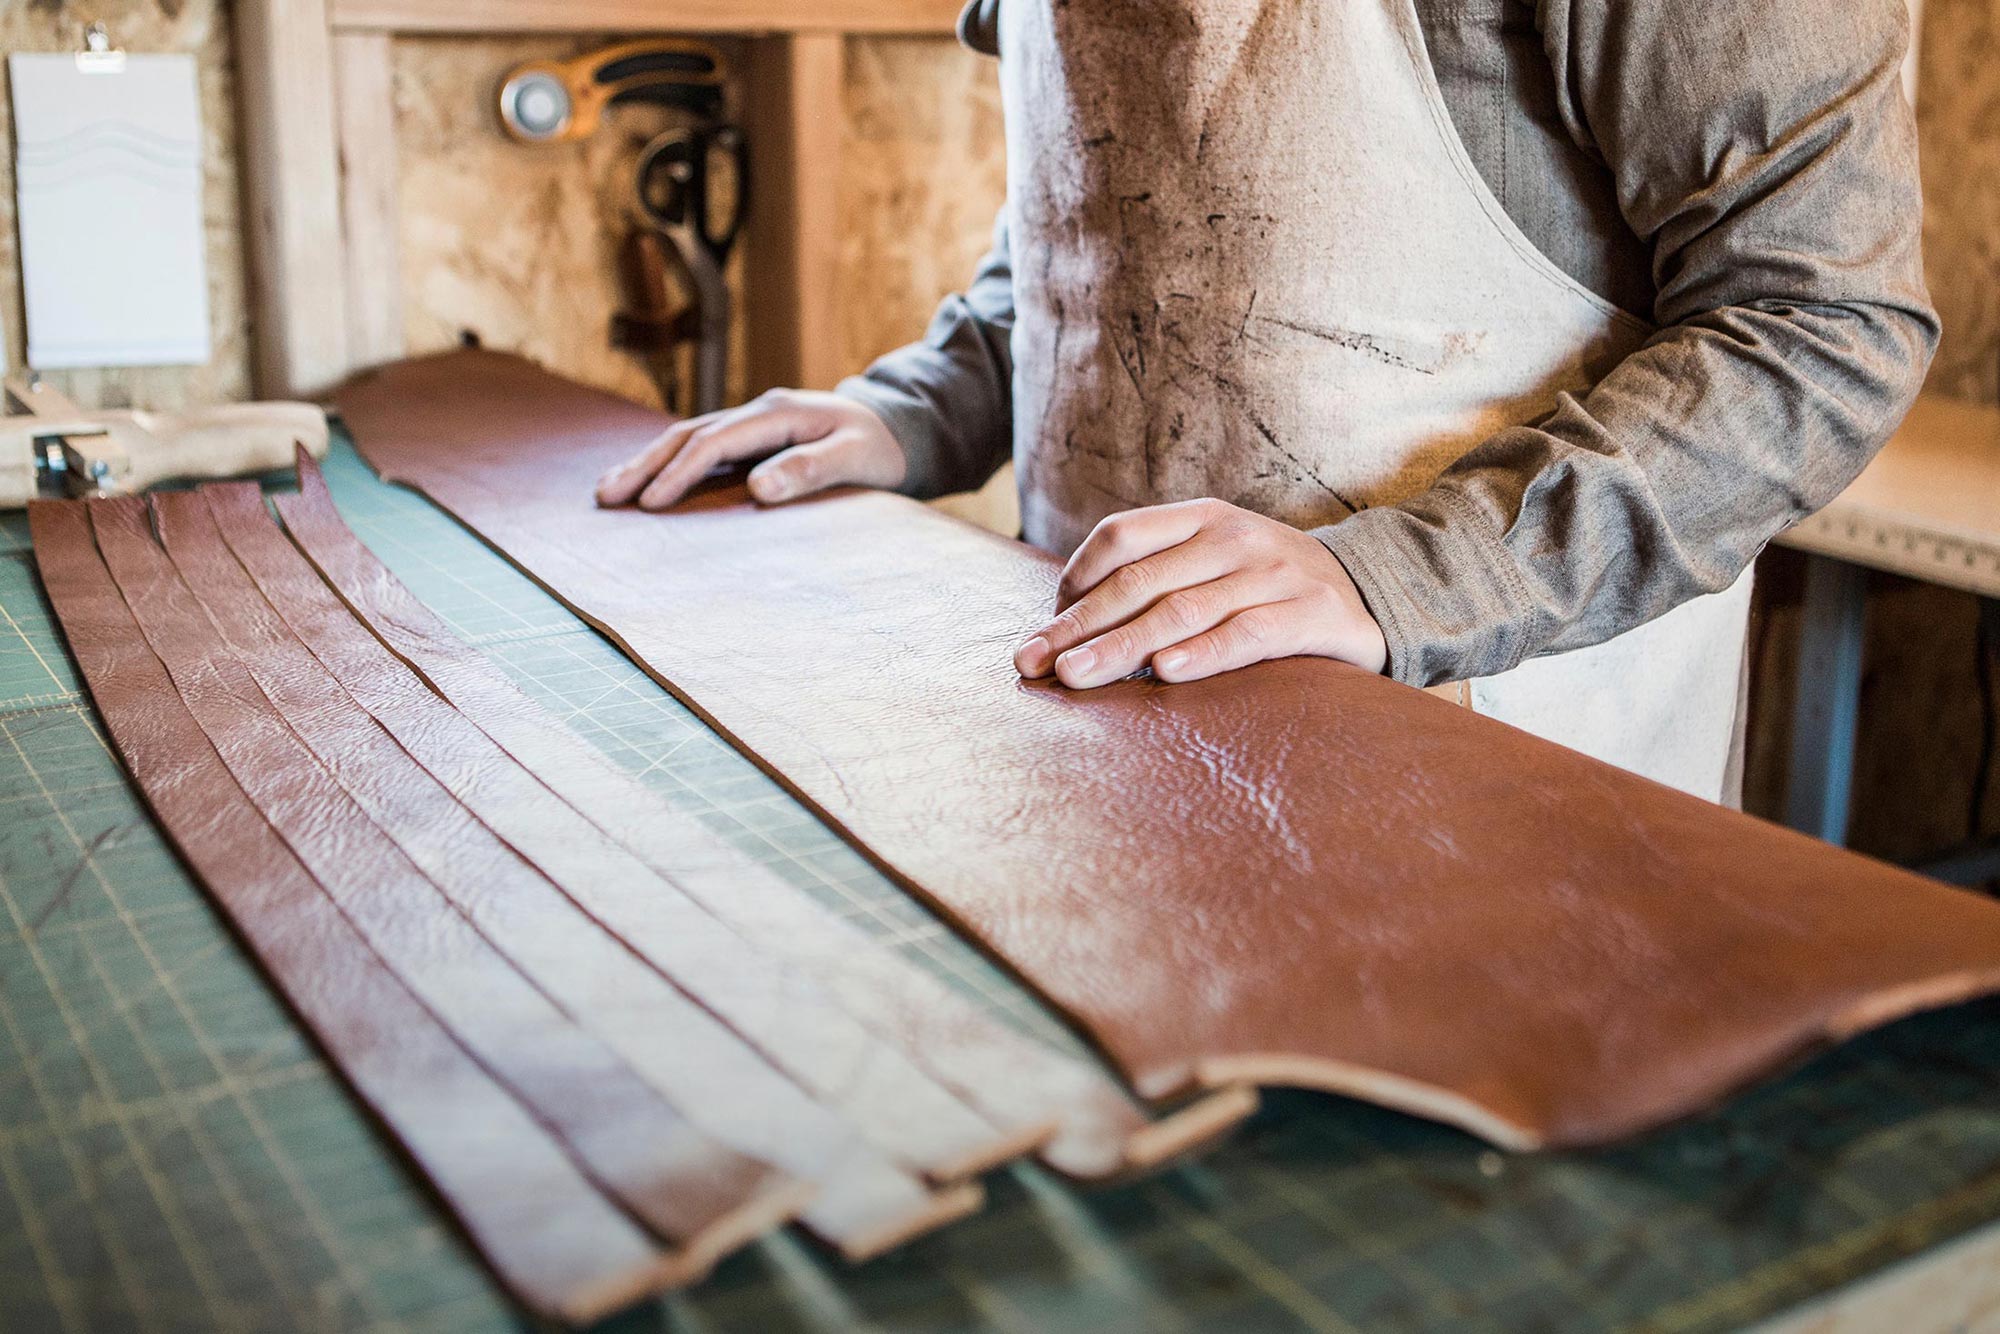 Leather production